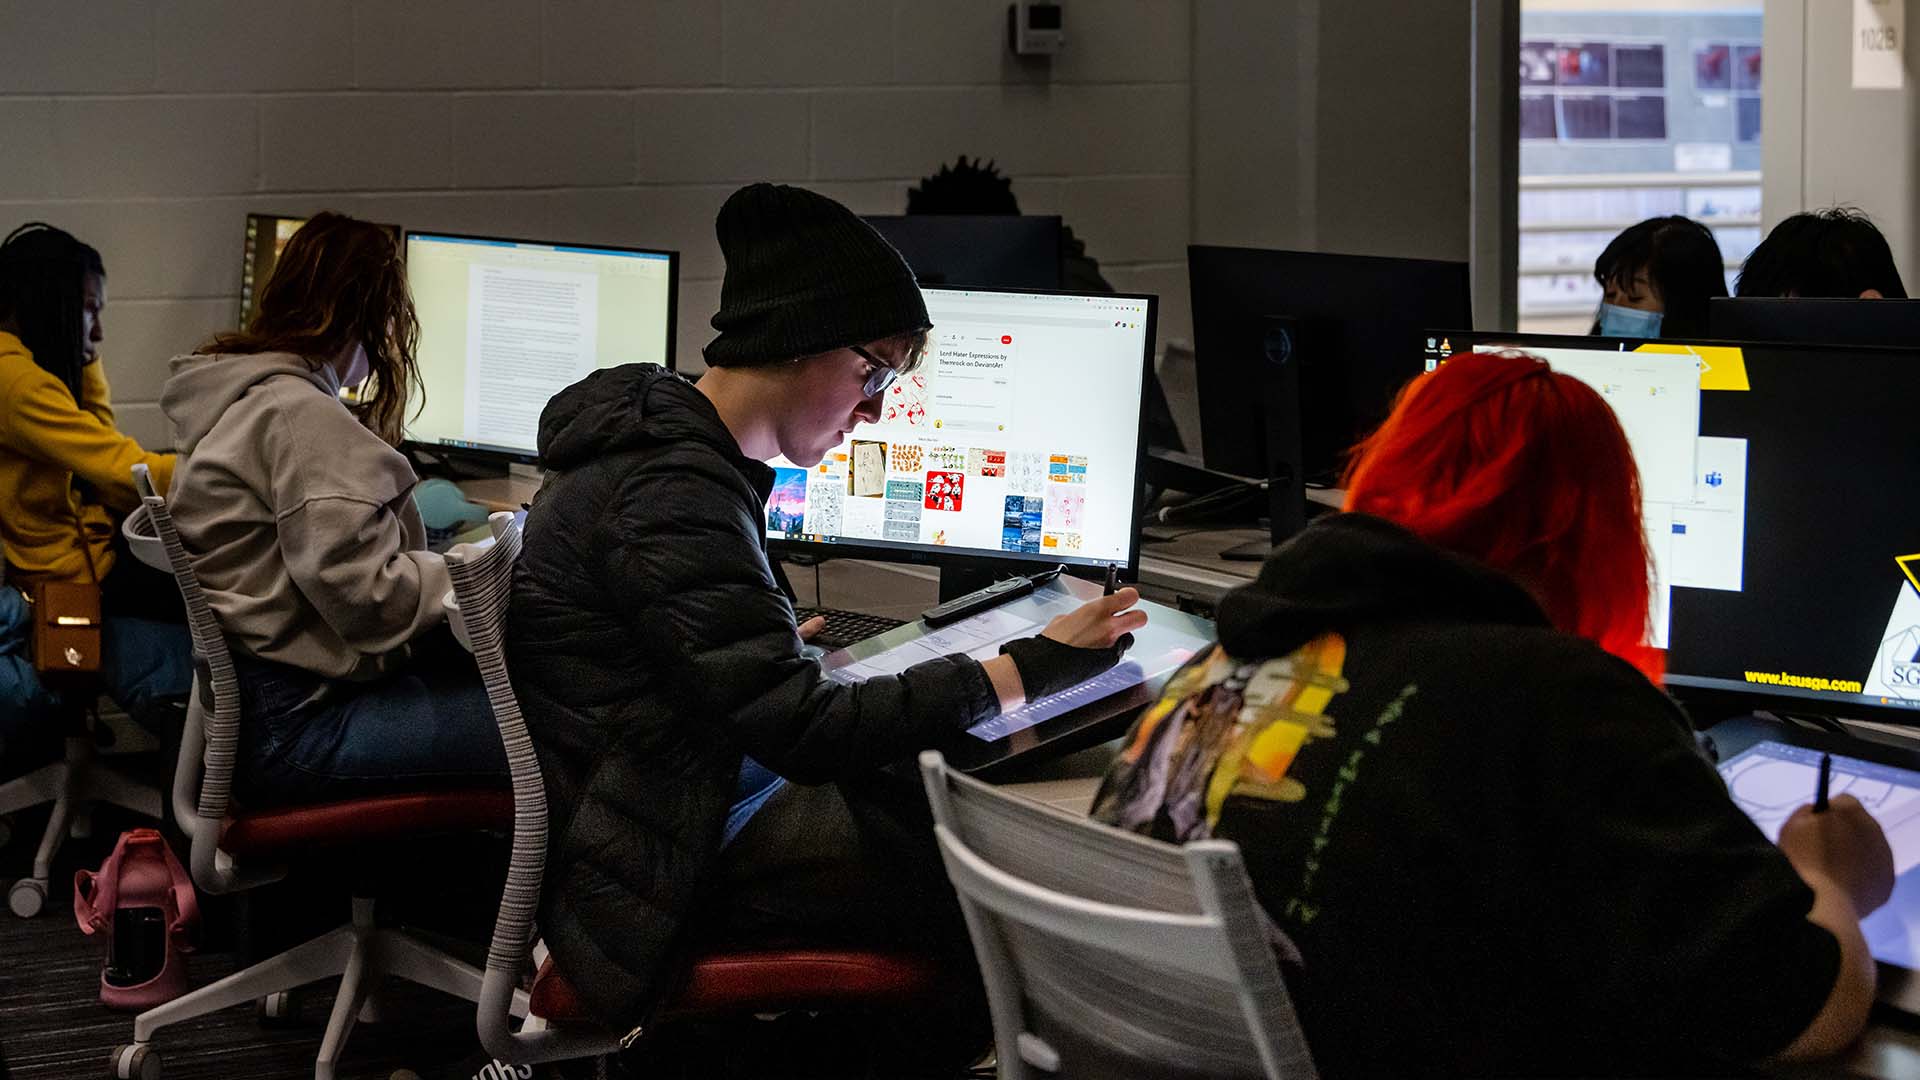  / Students in computer lab working on assignments.